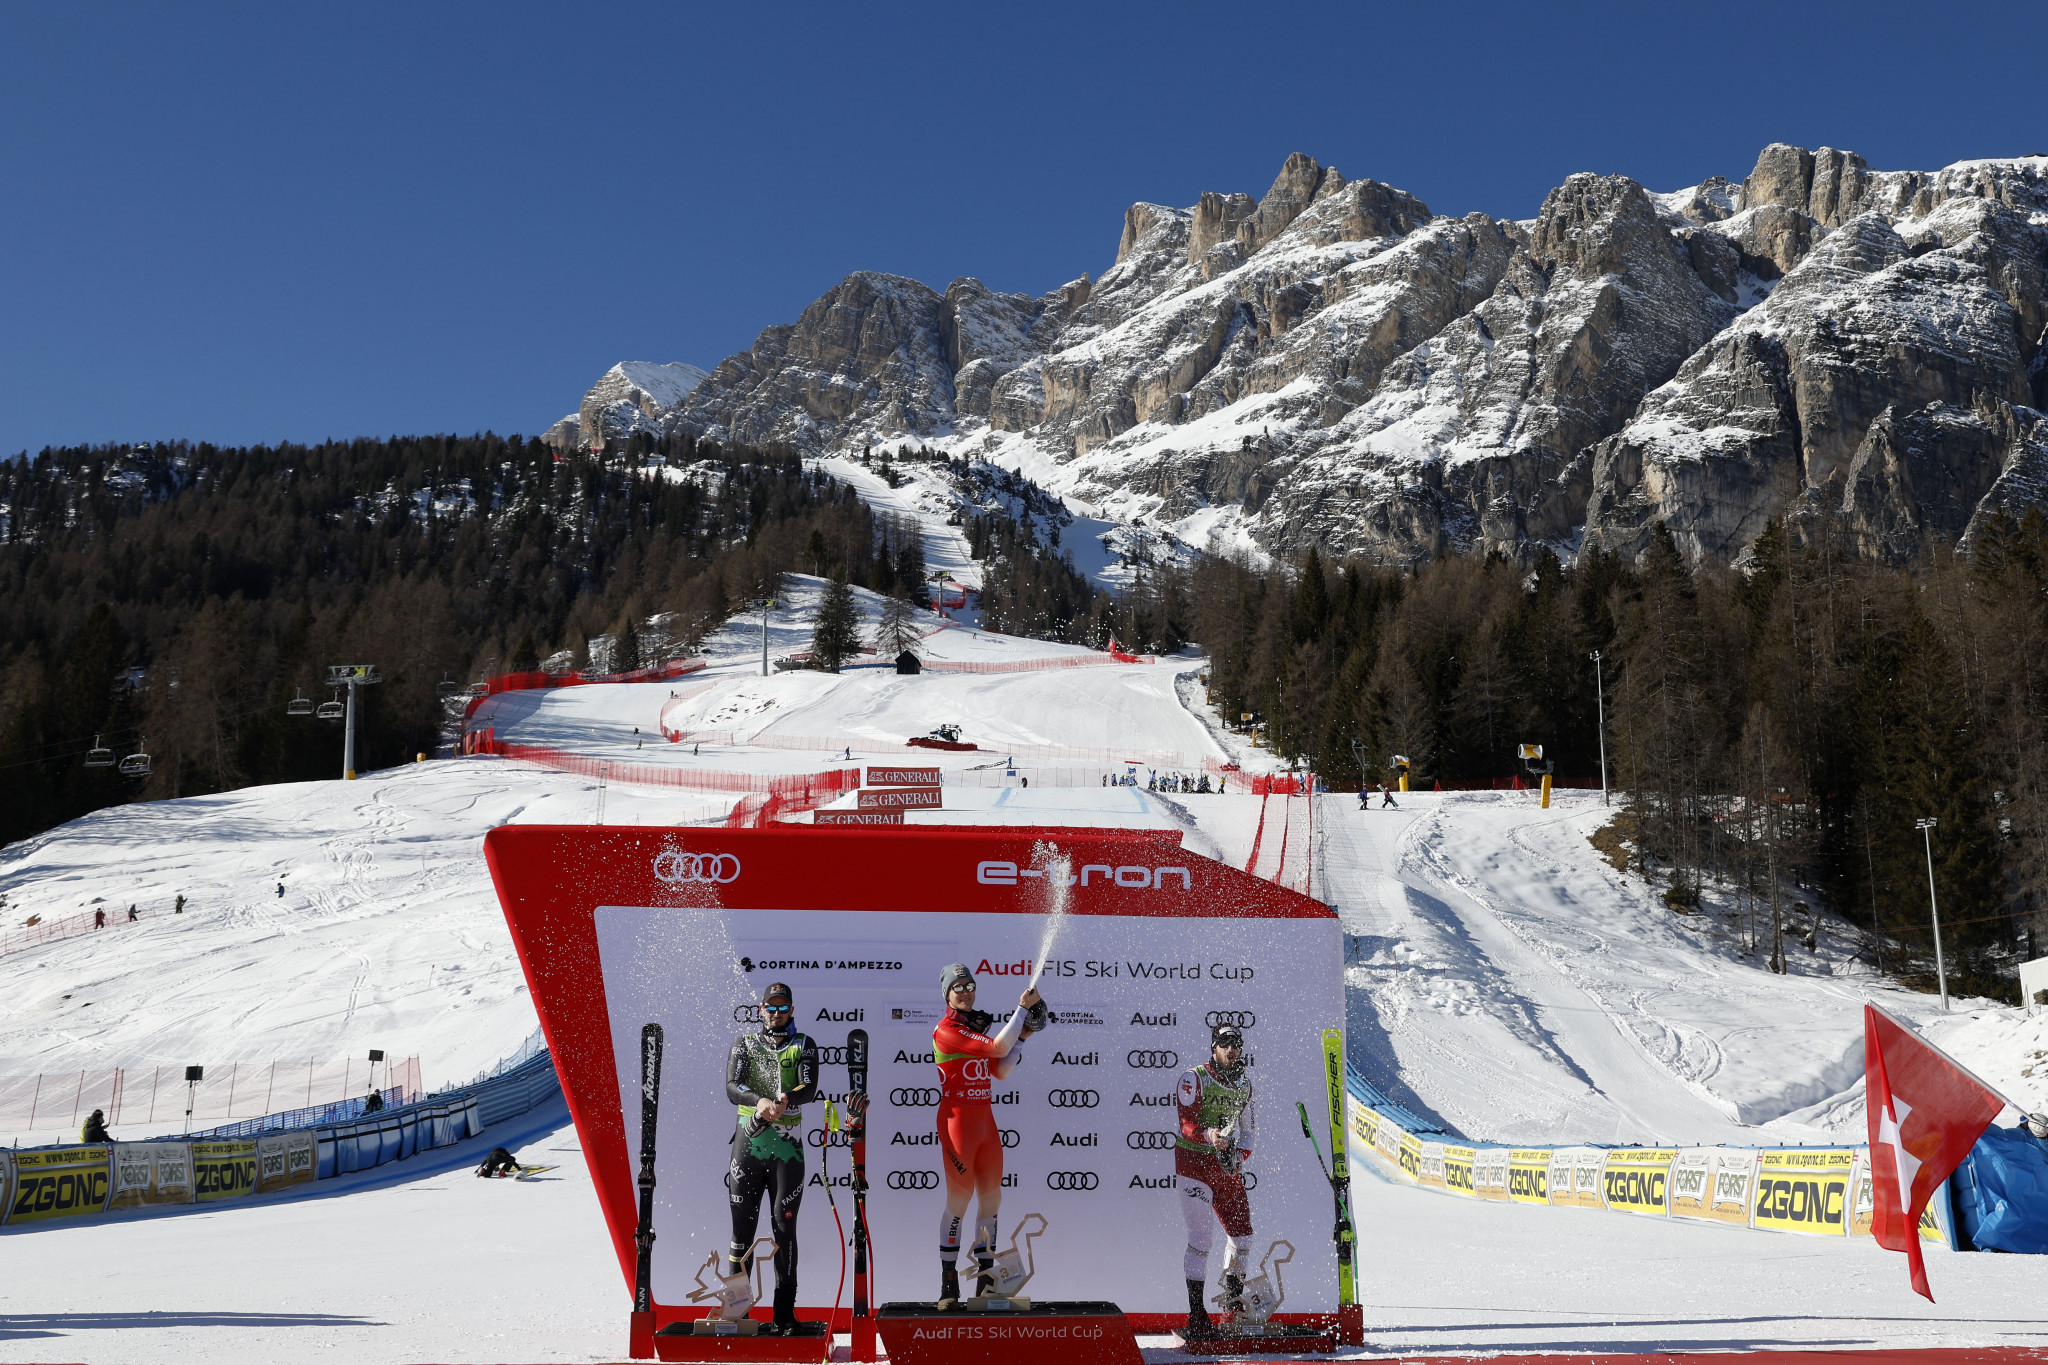 The podium for the FIS Alpine Skiing World Cup in Cortina D'Ampezzo, with Marco Odermatt centre winning a second successive super-G title in as many days ©Getty Images